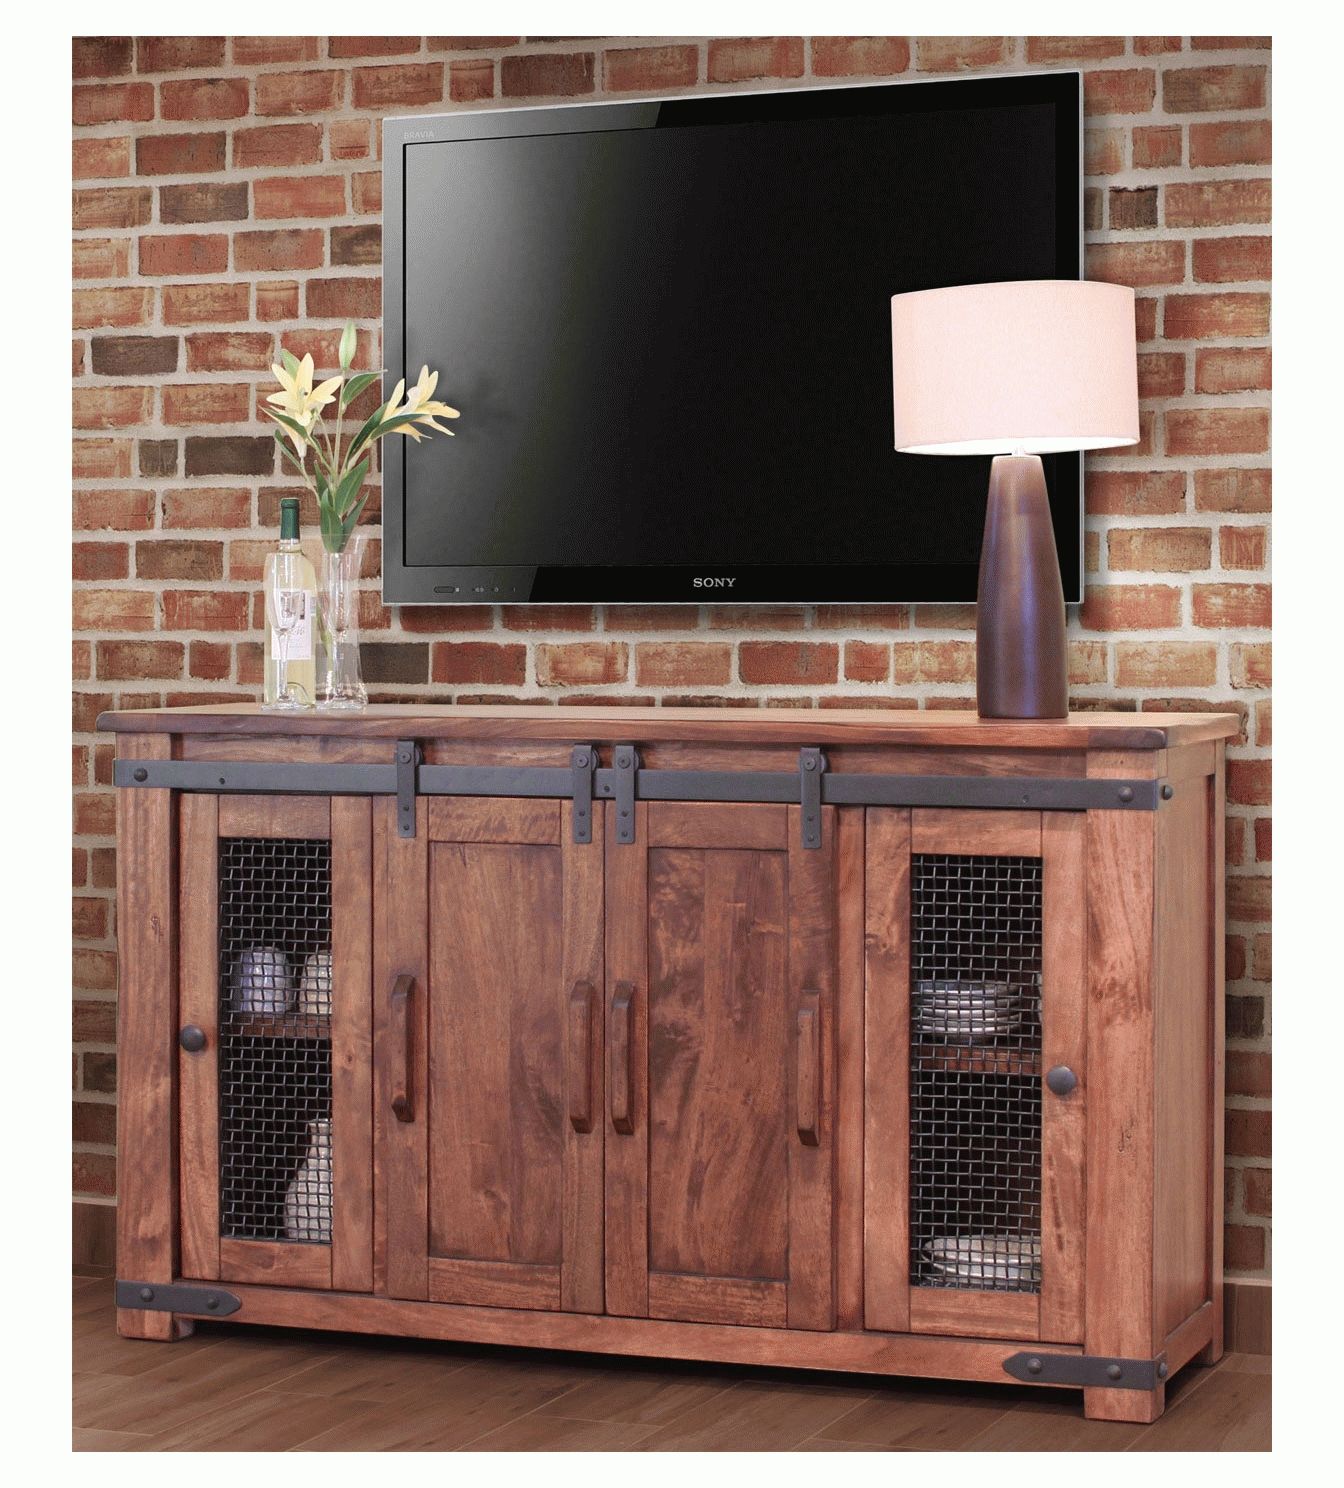 Rustic Barn Door Tv Stand, Barn Door Tv Stand, Barn Door Tv Console With Regard To Rustic Pine Tv Cabinets (View 2 of 15)